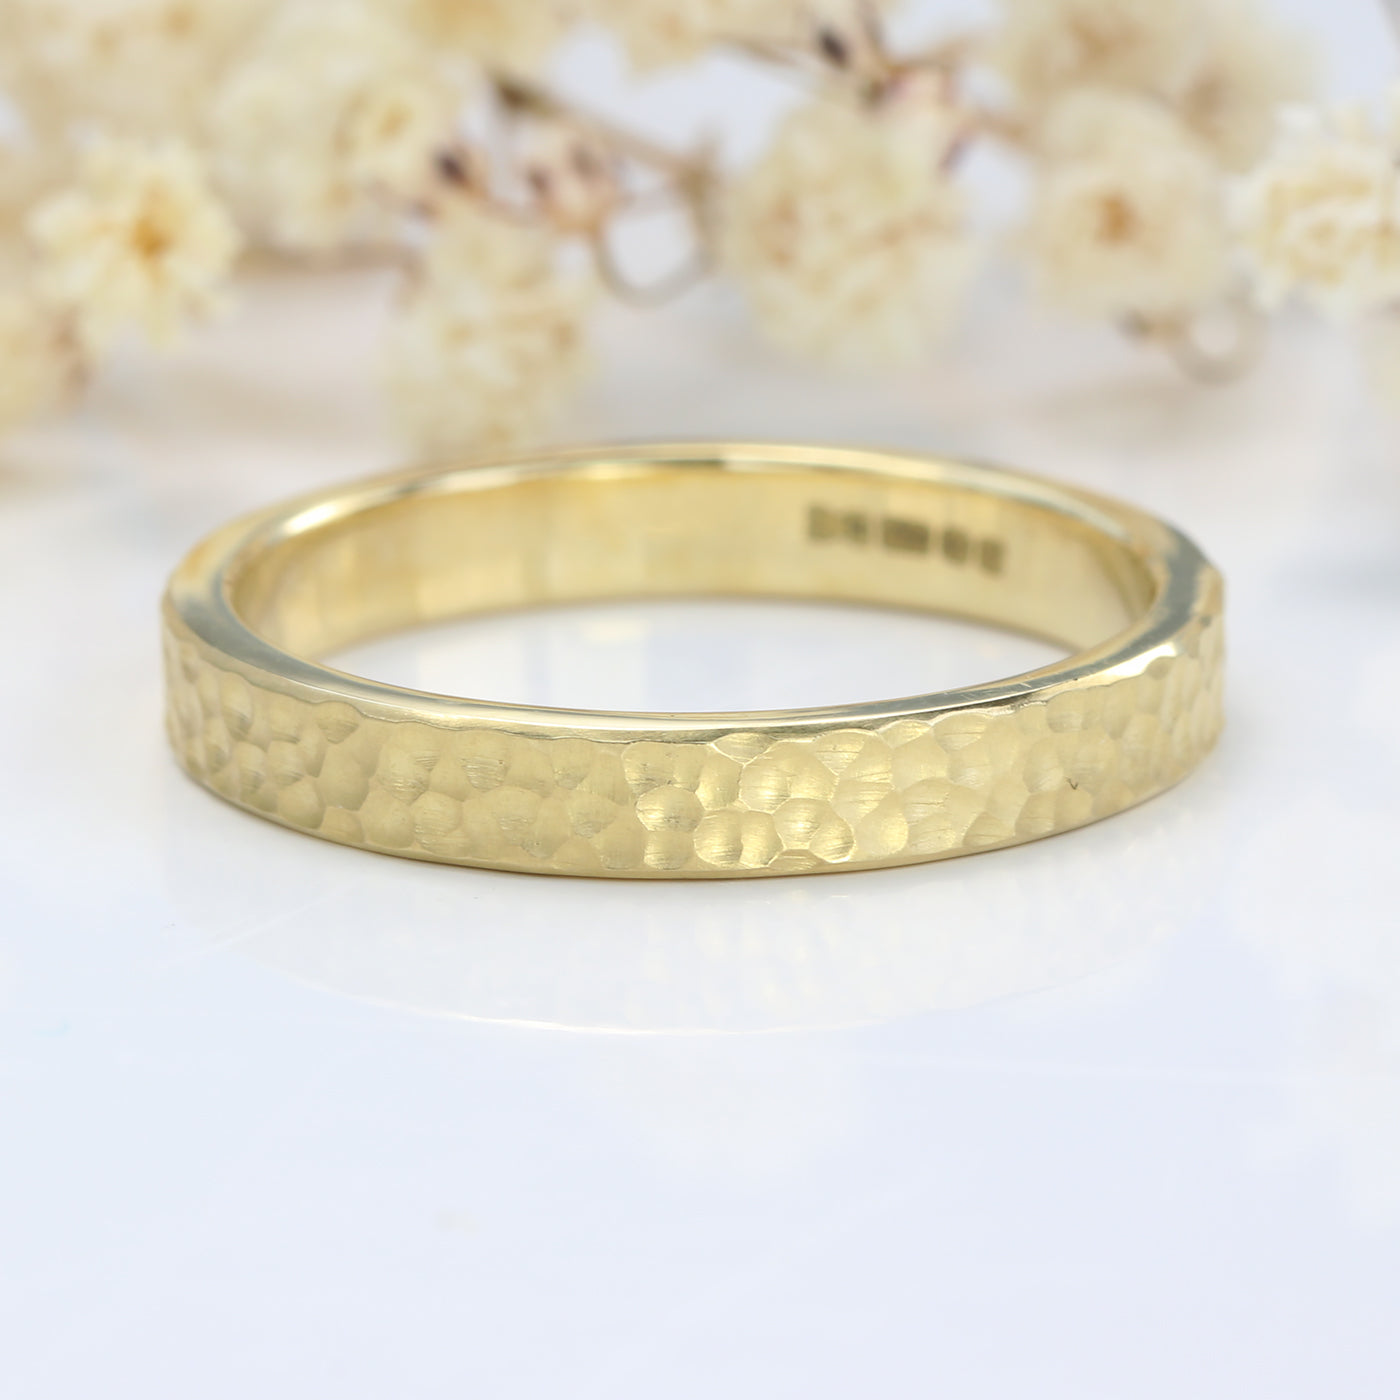 3mm Flat Hammered Wedding Ring in 18ct Yellow Gold – Size N 1/2 (Resize G – O)